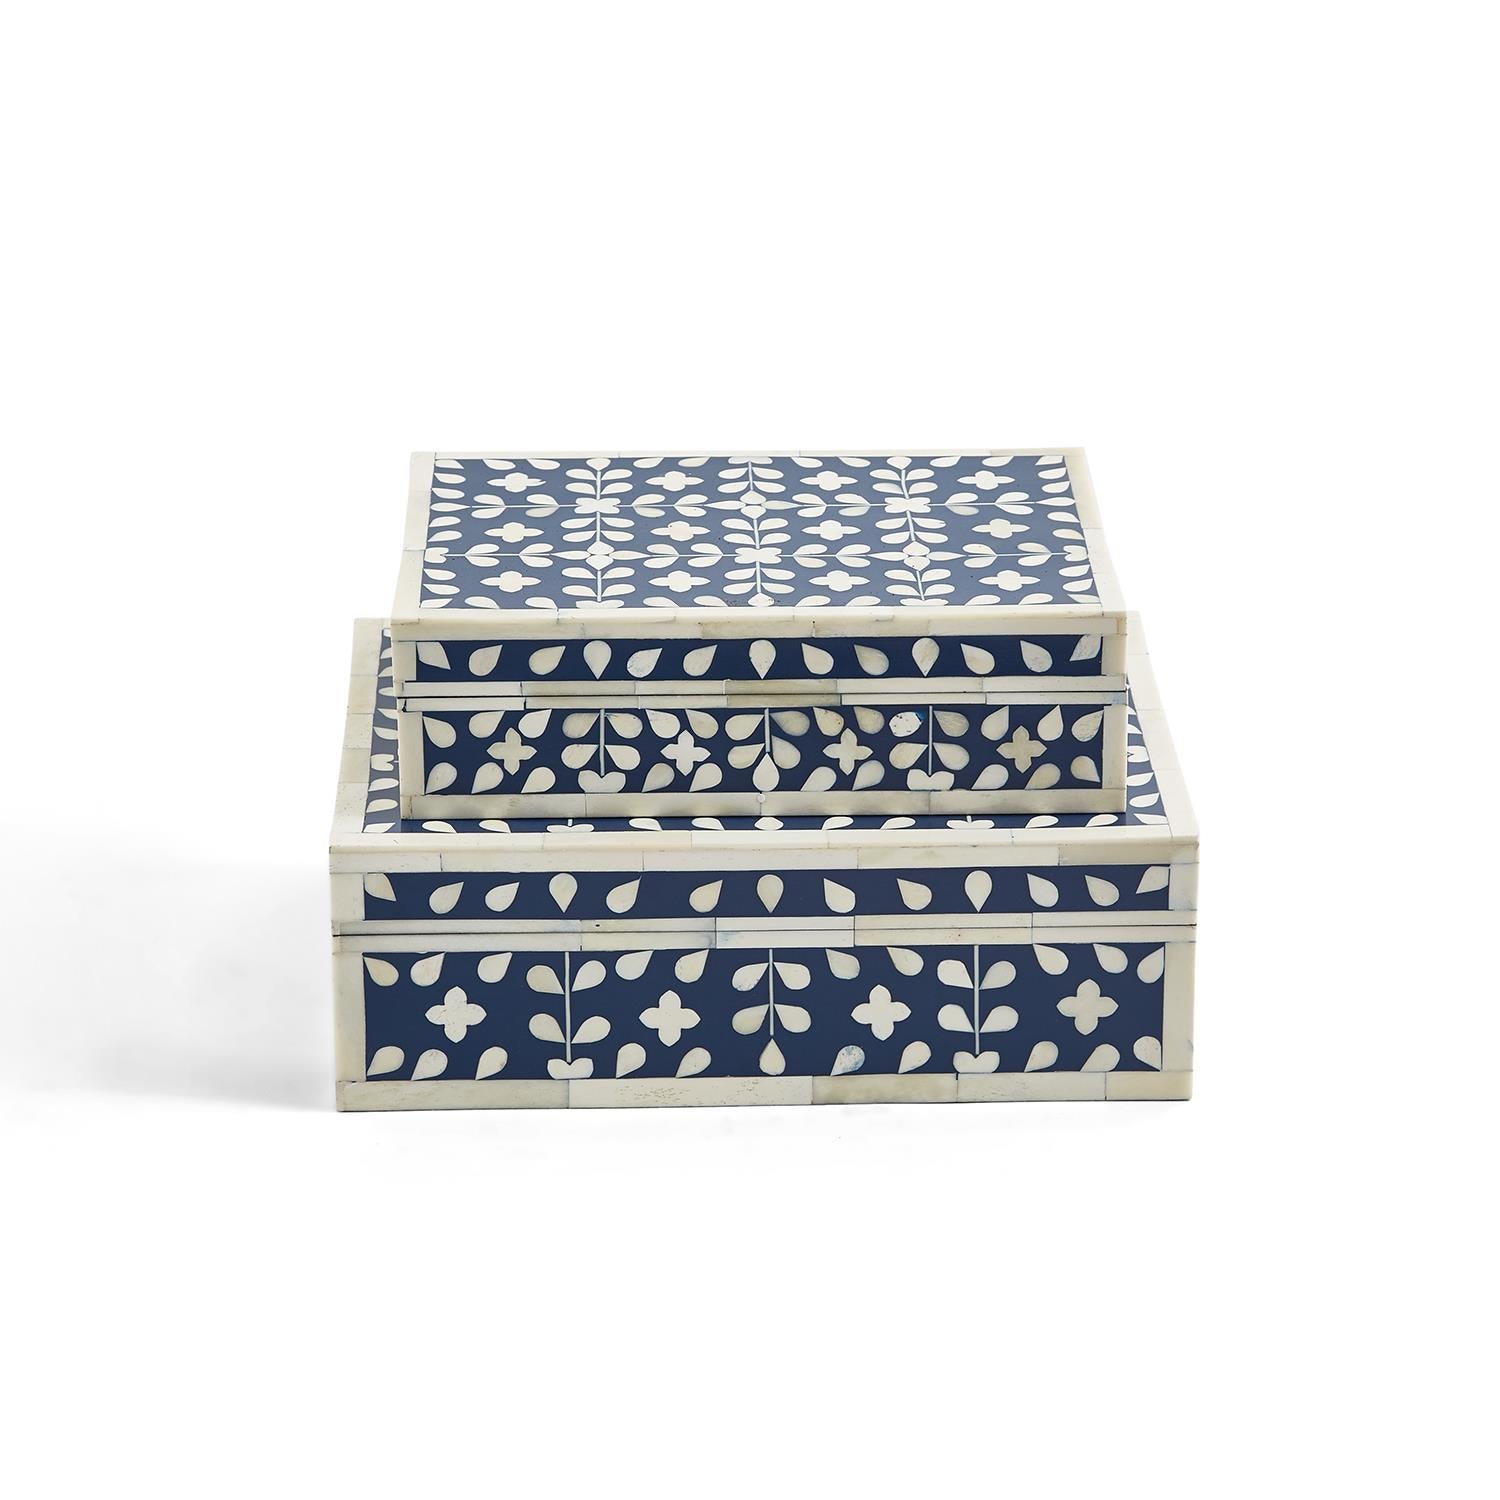 Two's Company S/2 Flower and Petals Blue & White Tear Hinged Cover Box